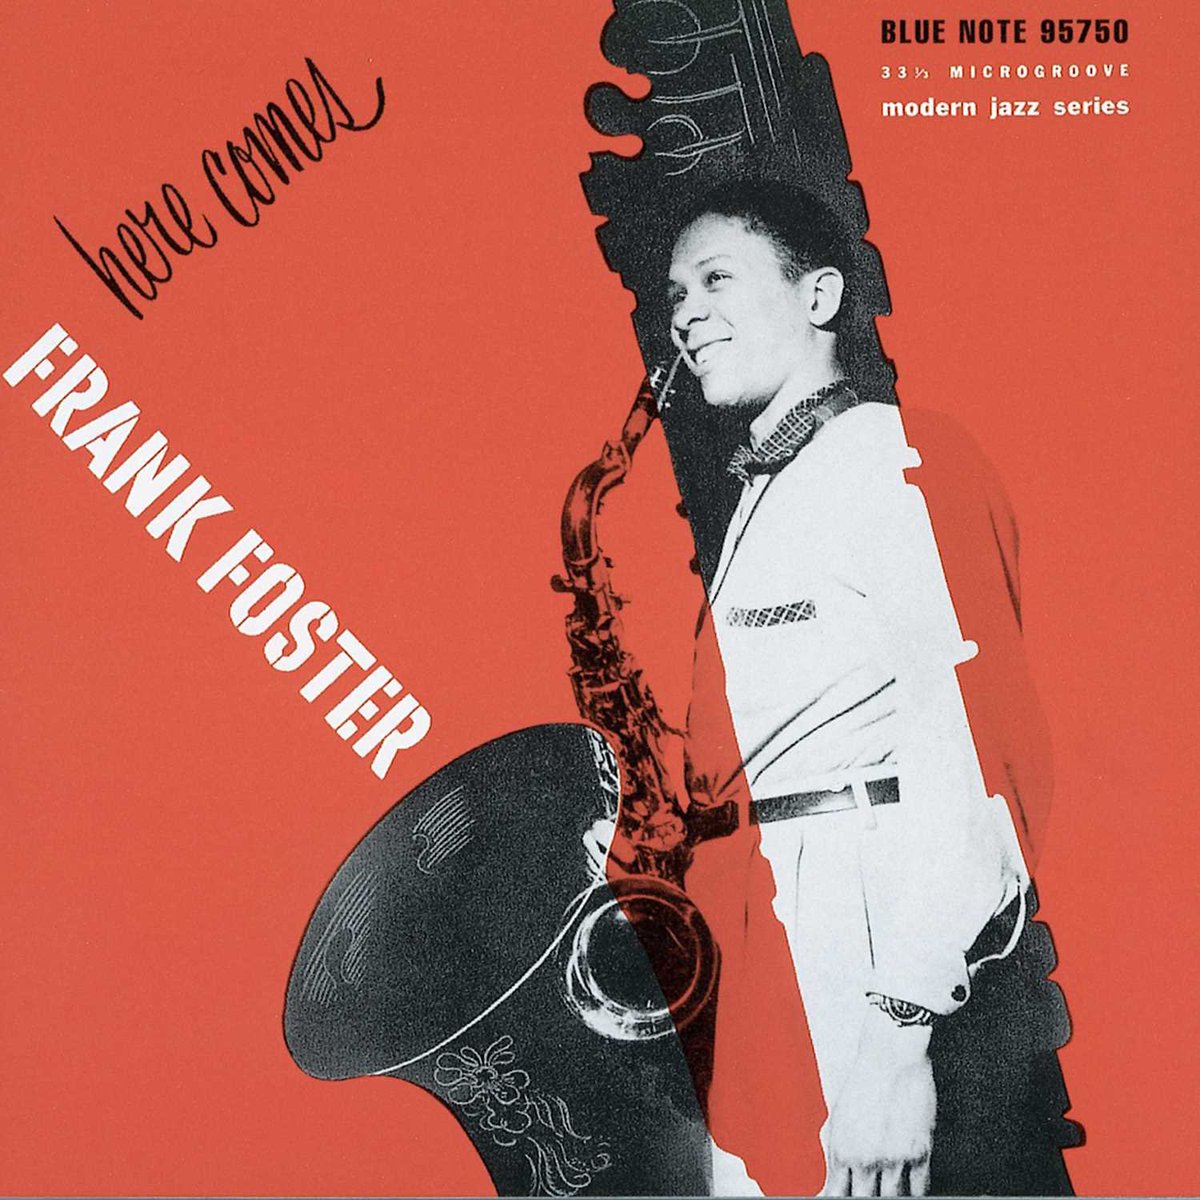 'Here Comes Frank Foster' was recorded 70 years ago today on May 5, 1954 featuring the tenor saxophonist with Benny Powell on trombone, Gildo Mahones on piano, Percy Heath on bass & Kenny Clarke on drums. Hear 'Out of Nowhere' on our 'Bebop' playlist: bluenote.lnk.to/bebop